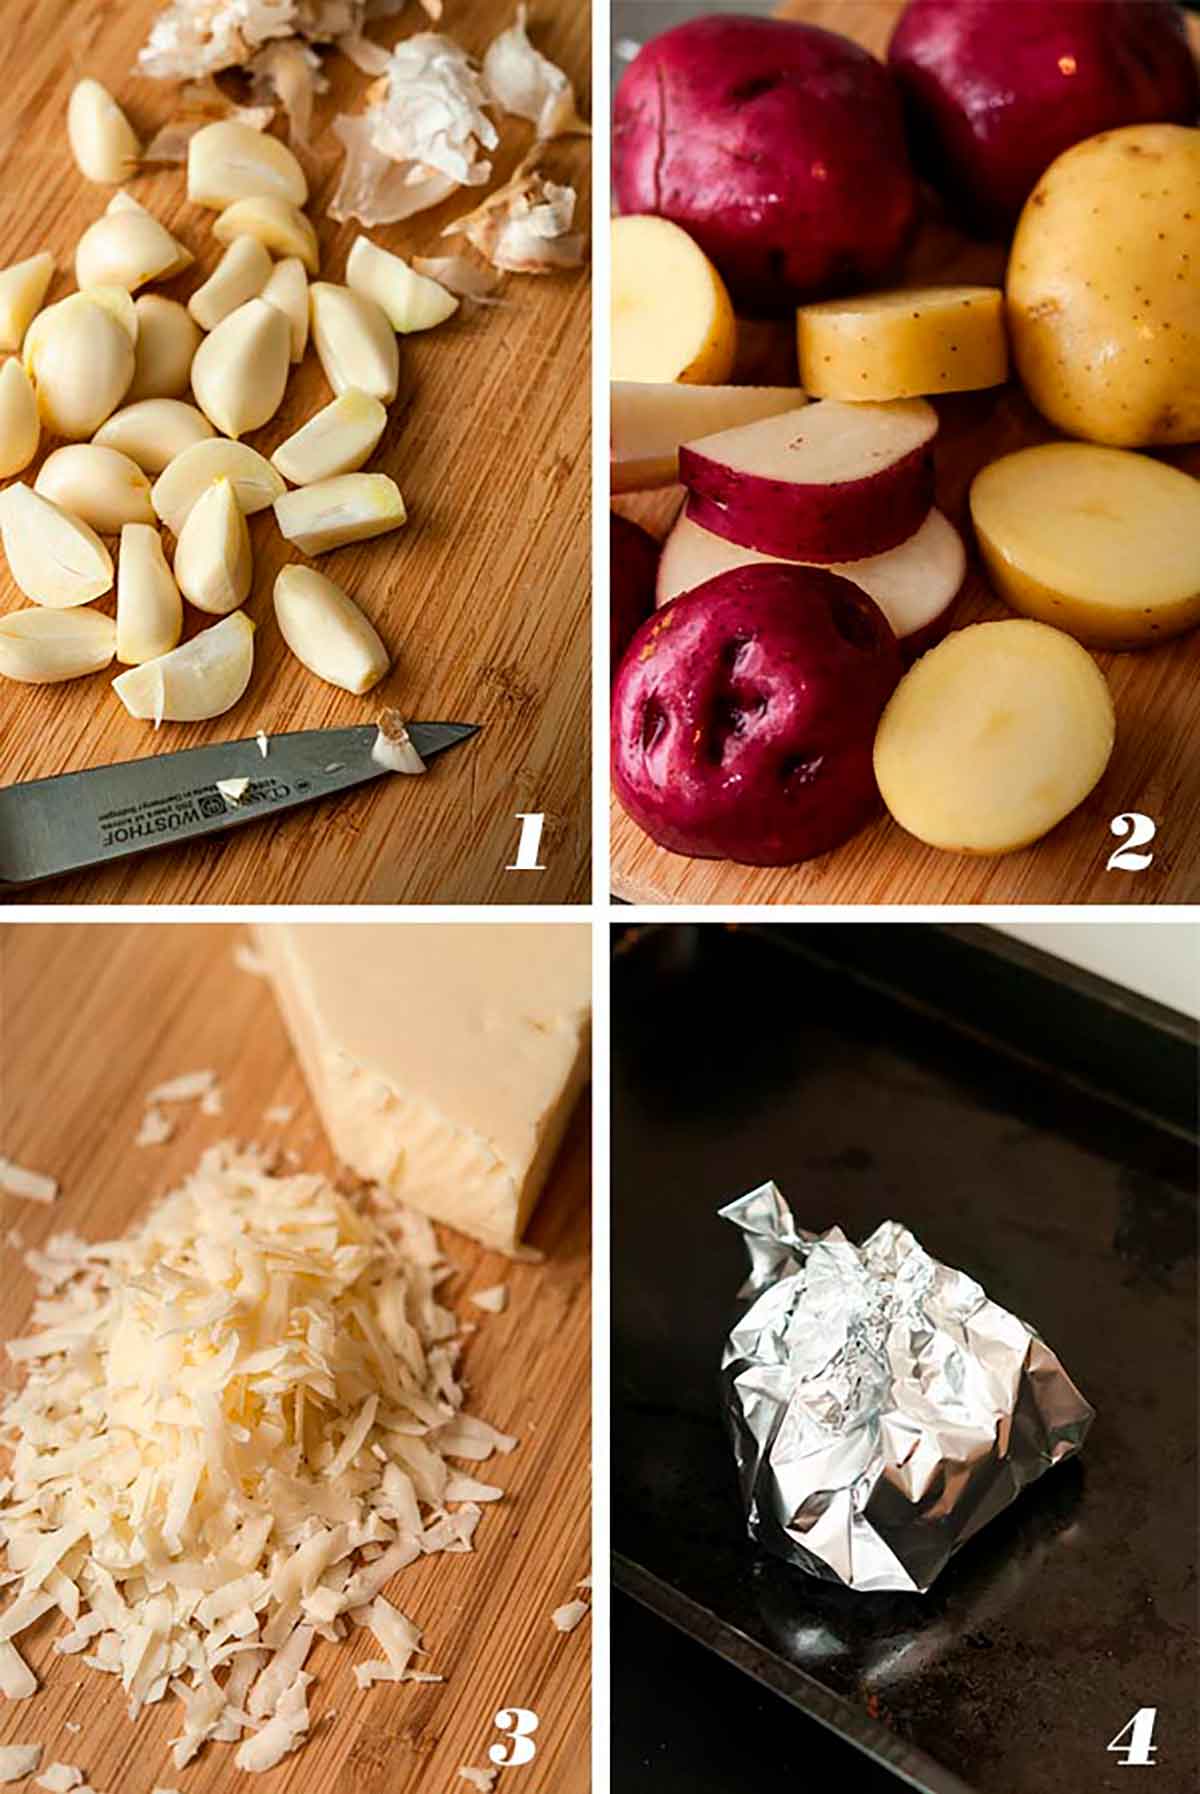 A collage of 4 numbered images showing how to make baked mashed potatoes.